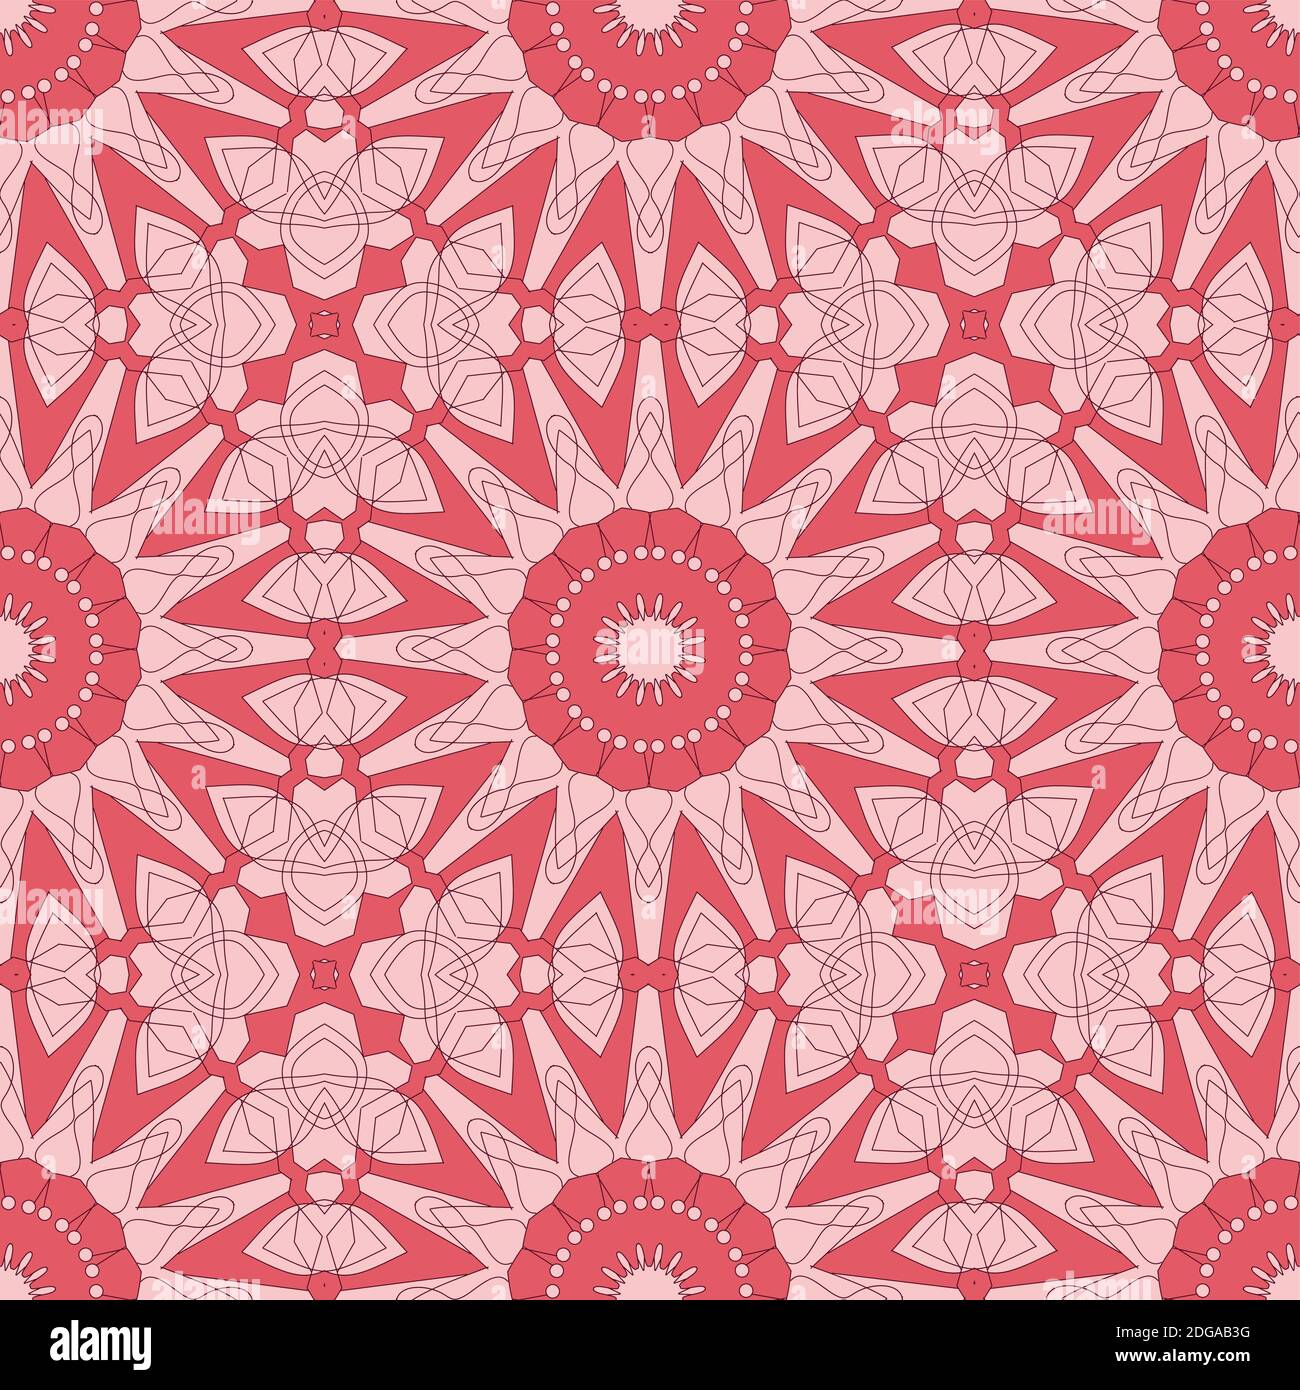 Ethnic seamless vector pattern. Red geometric flower mandalas. Can be used for design of fabric, covers, wallpapers, tiles. Stock Vector